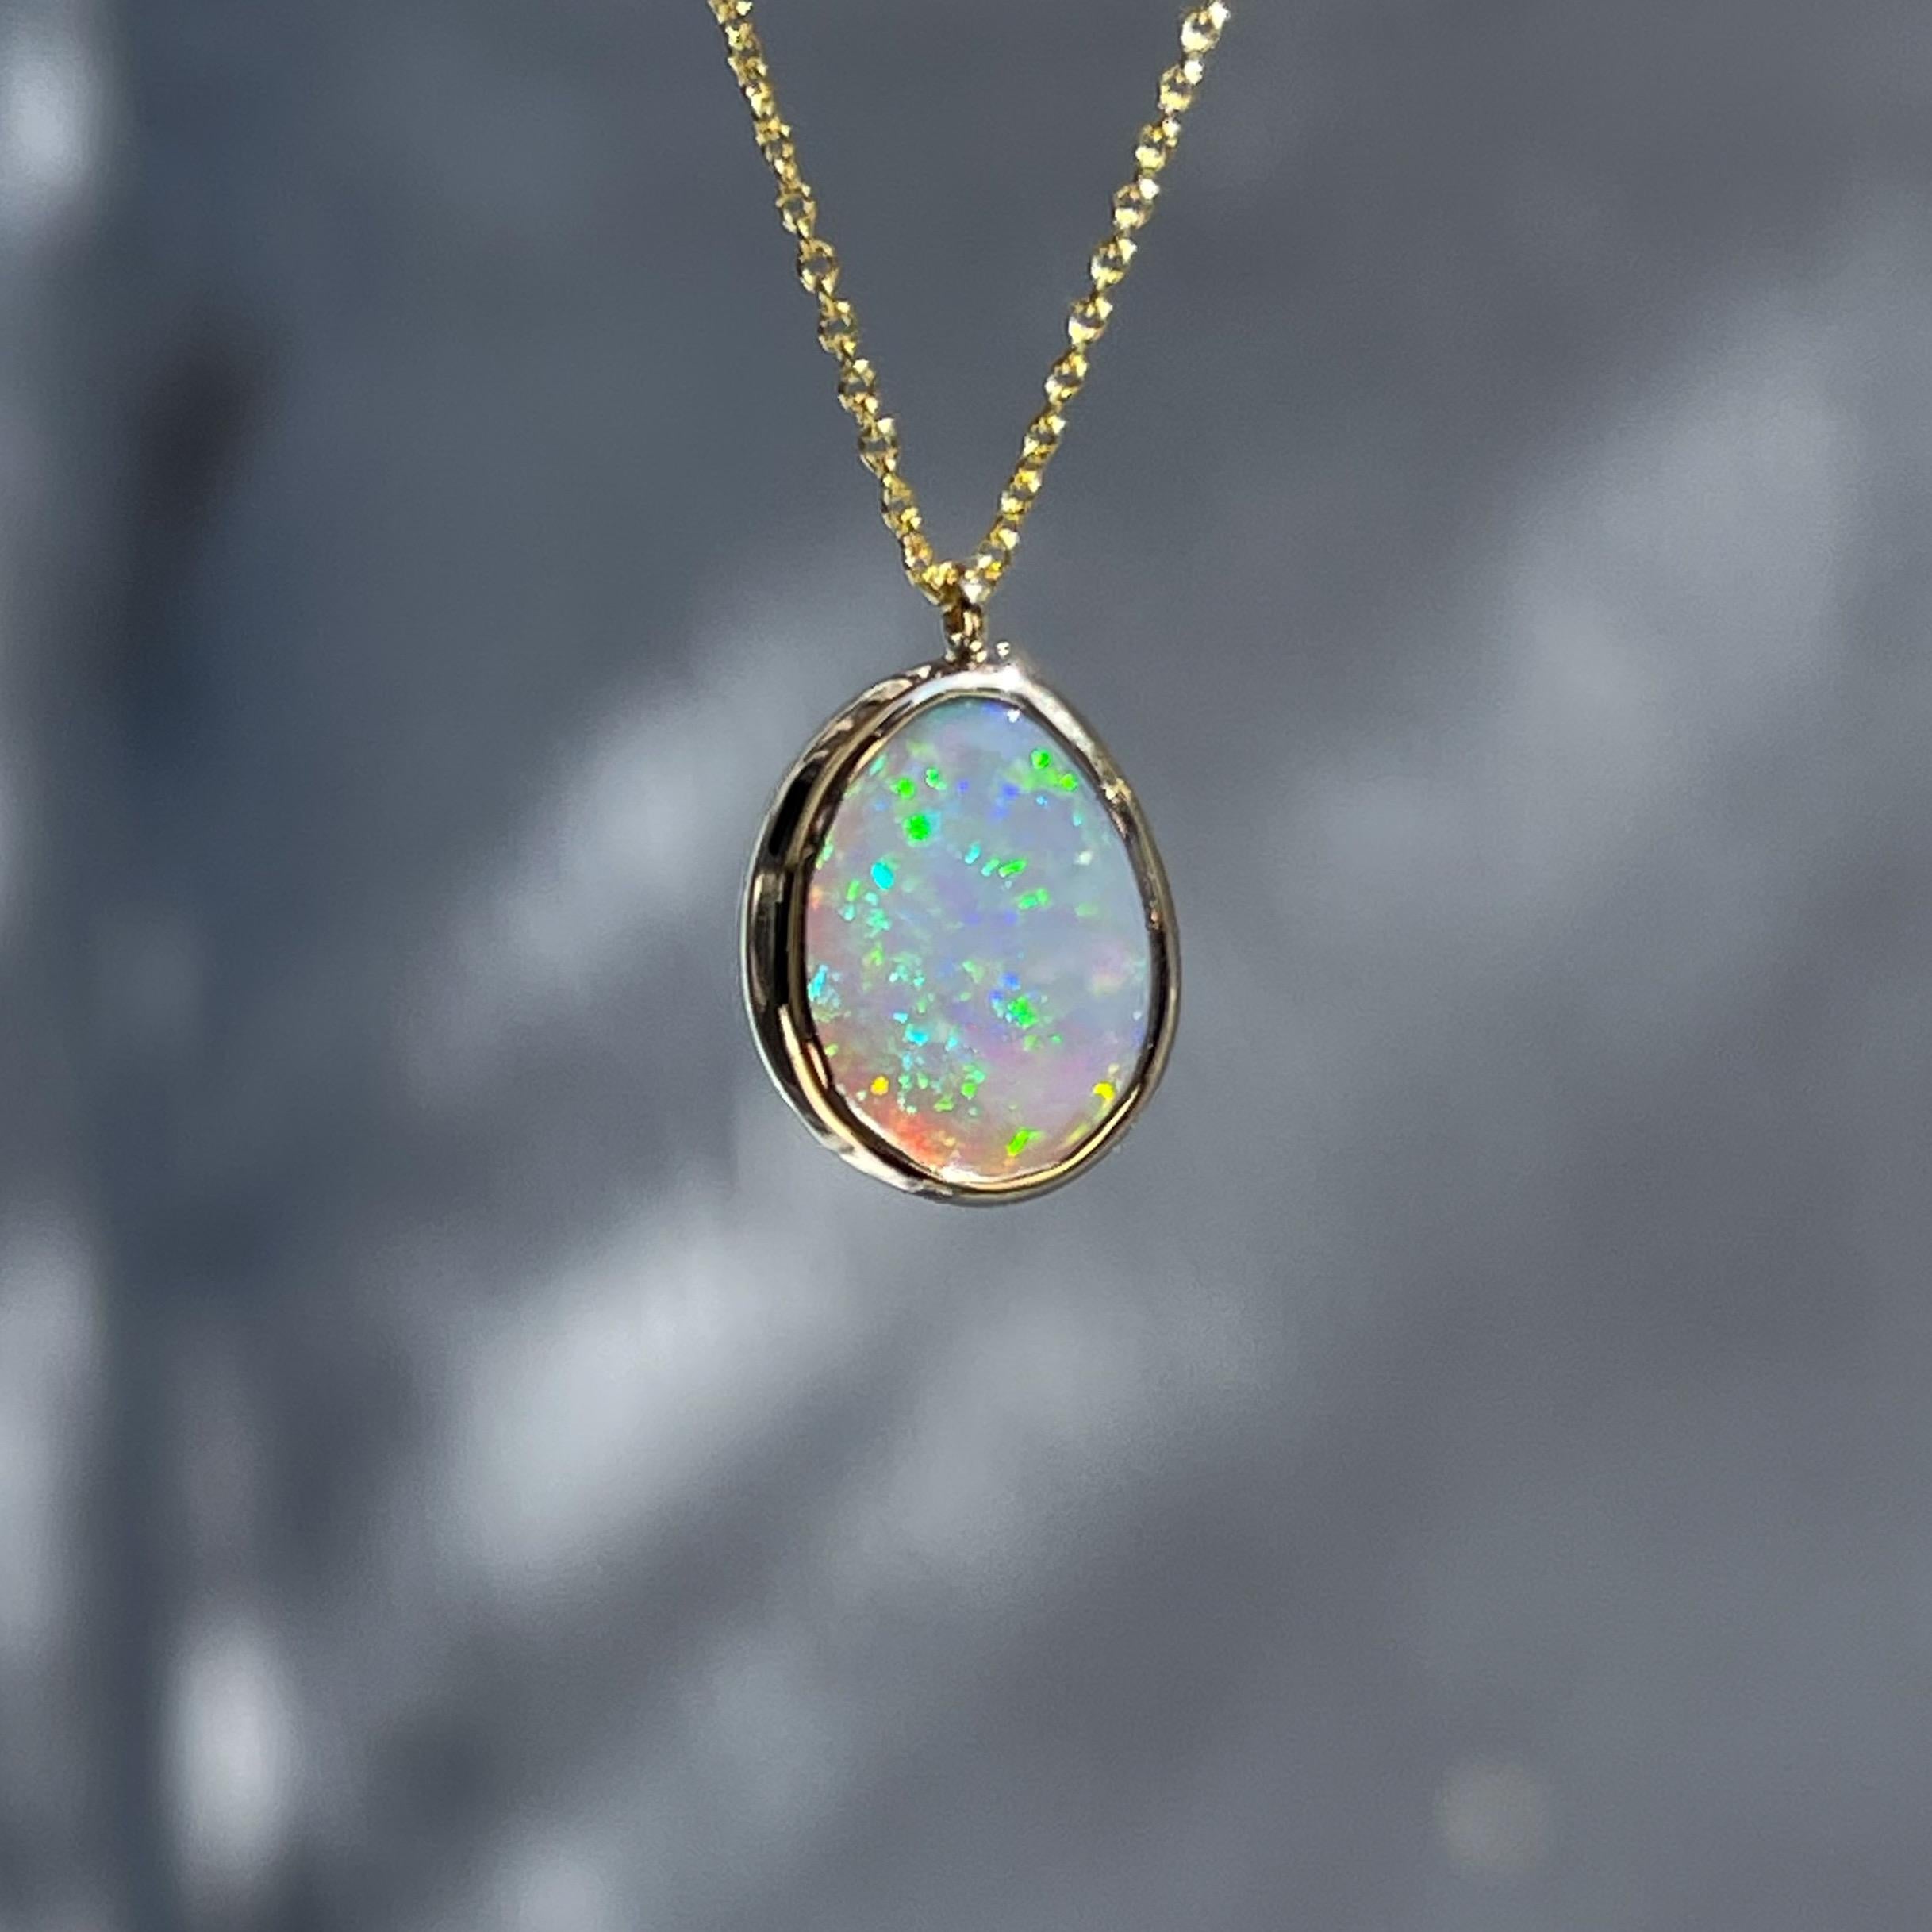 Flecks of sunset and shimmering green spark against the misty grey backdrop of this Australian Opal Necklace. Beautifully neutral, the Lightning Ridge Opal makes a stunning canvas for the contrasting colors. Framed in yellow gold, and mounted in a